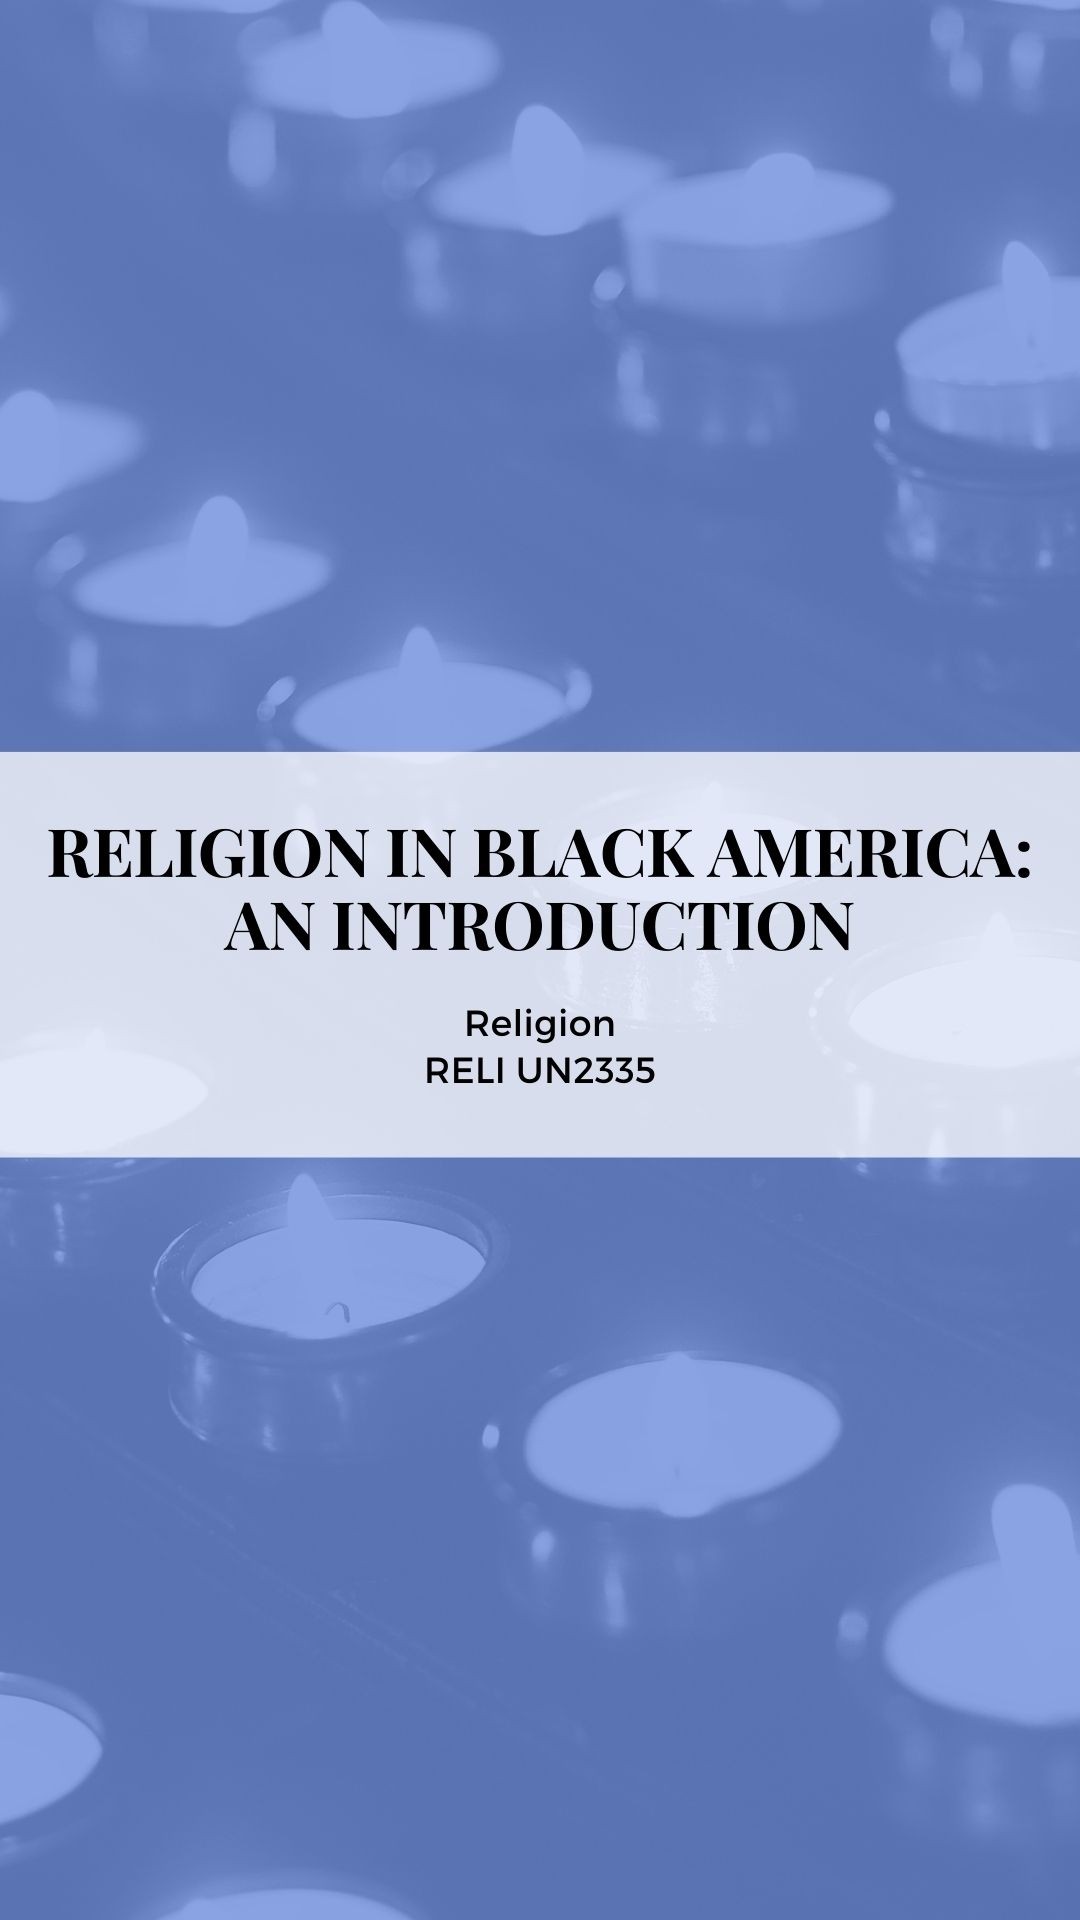 Spring 2021 course Religion in Black America: An Introduction; course number RELI UN2335